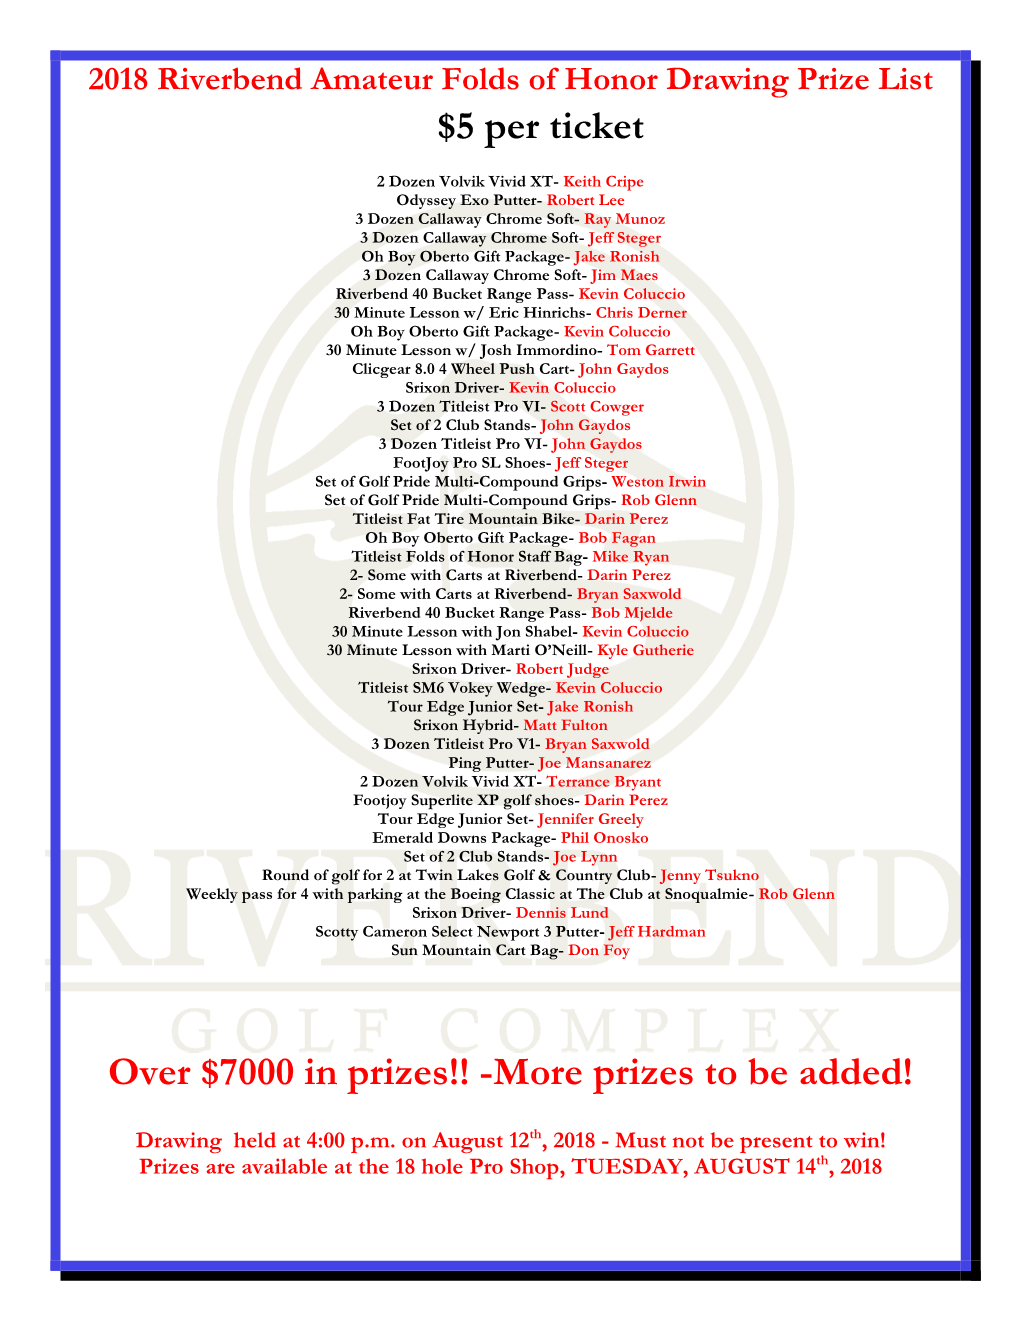 $5 Per Ticket Over $7000 in Prizes!! -More Prizes to Be Added!